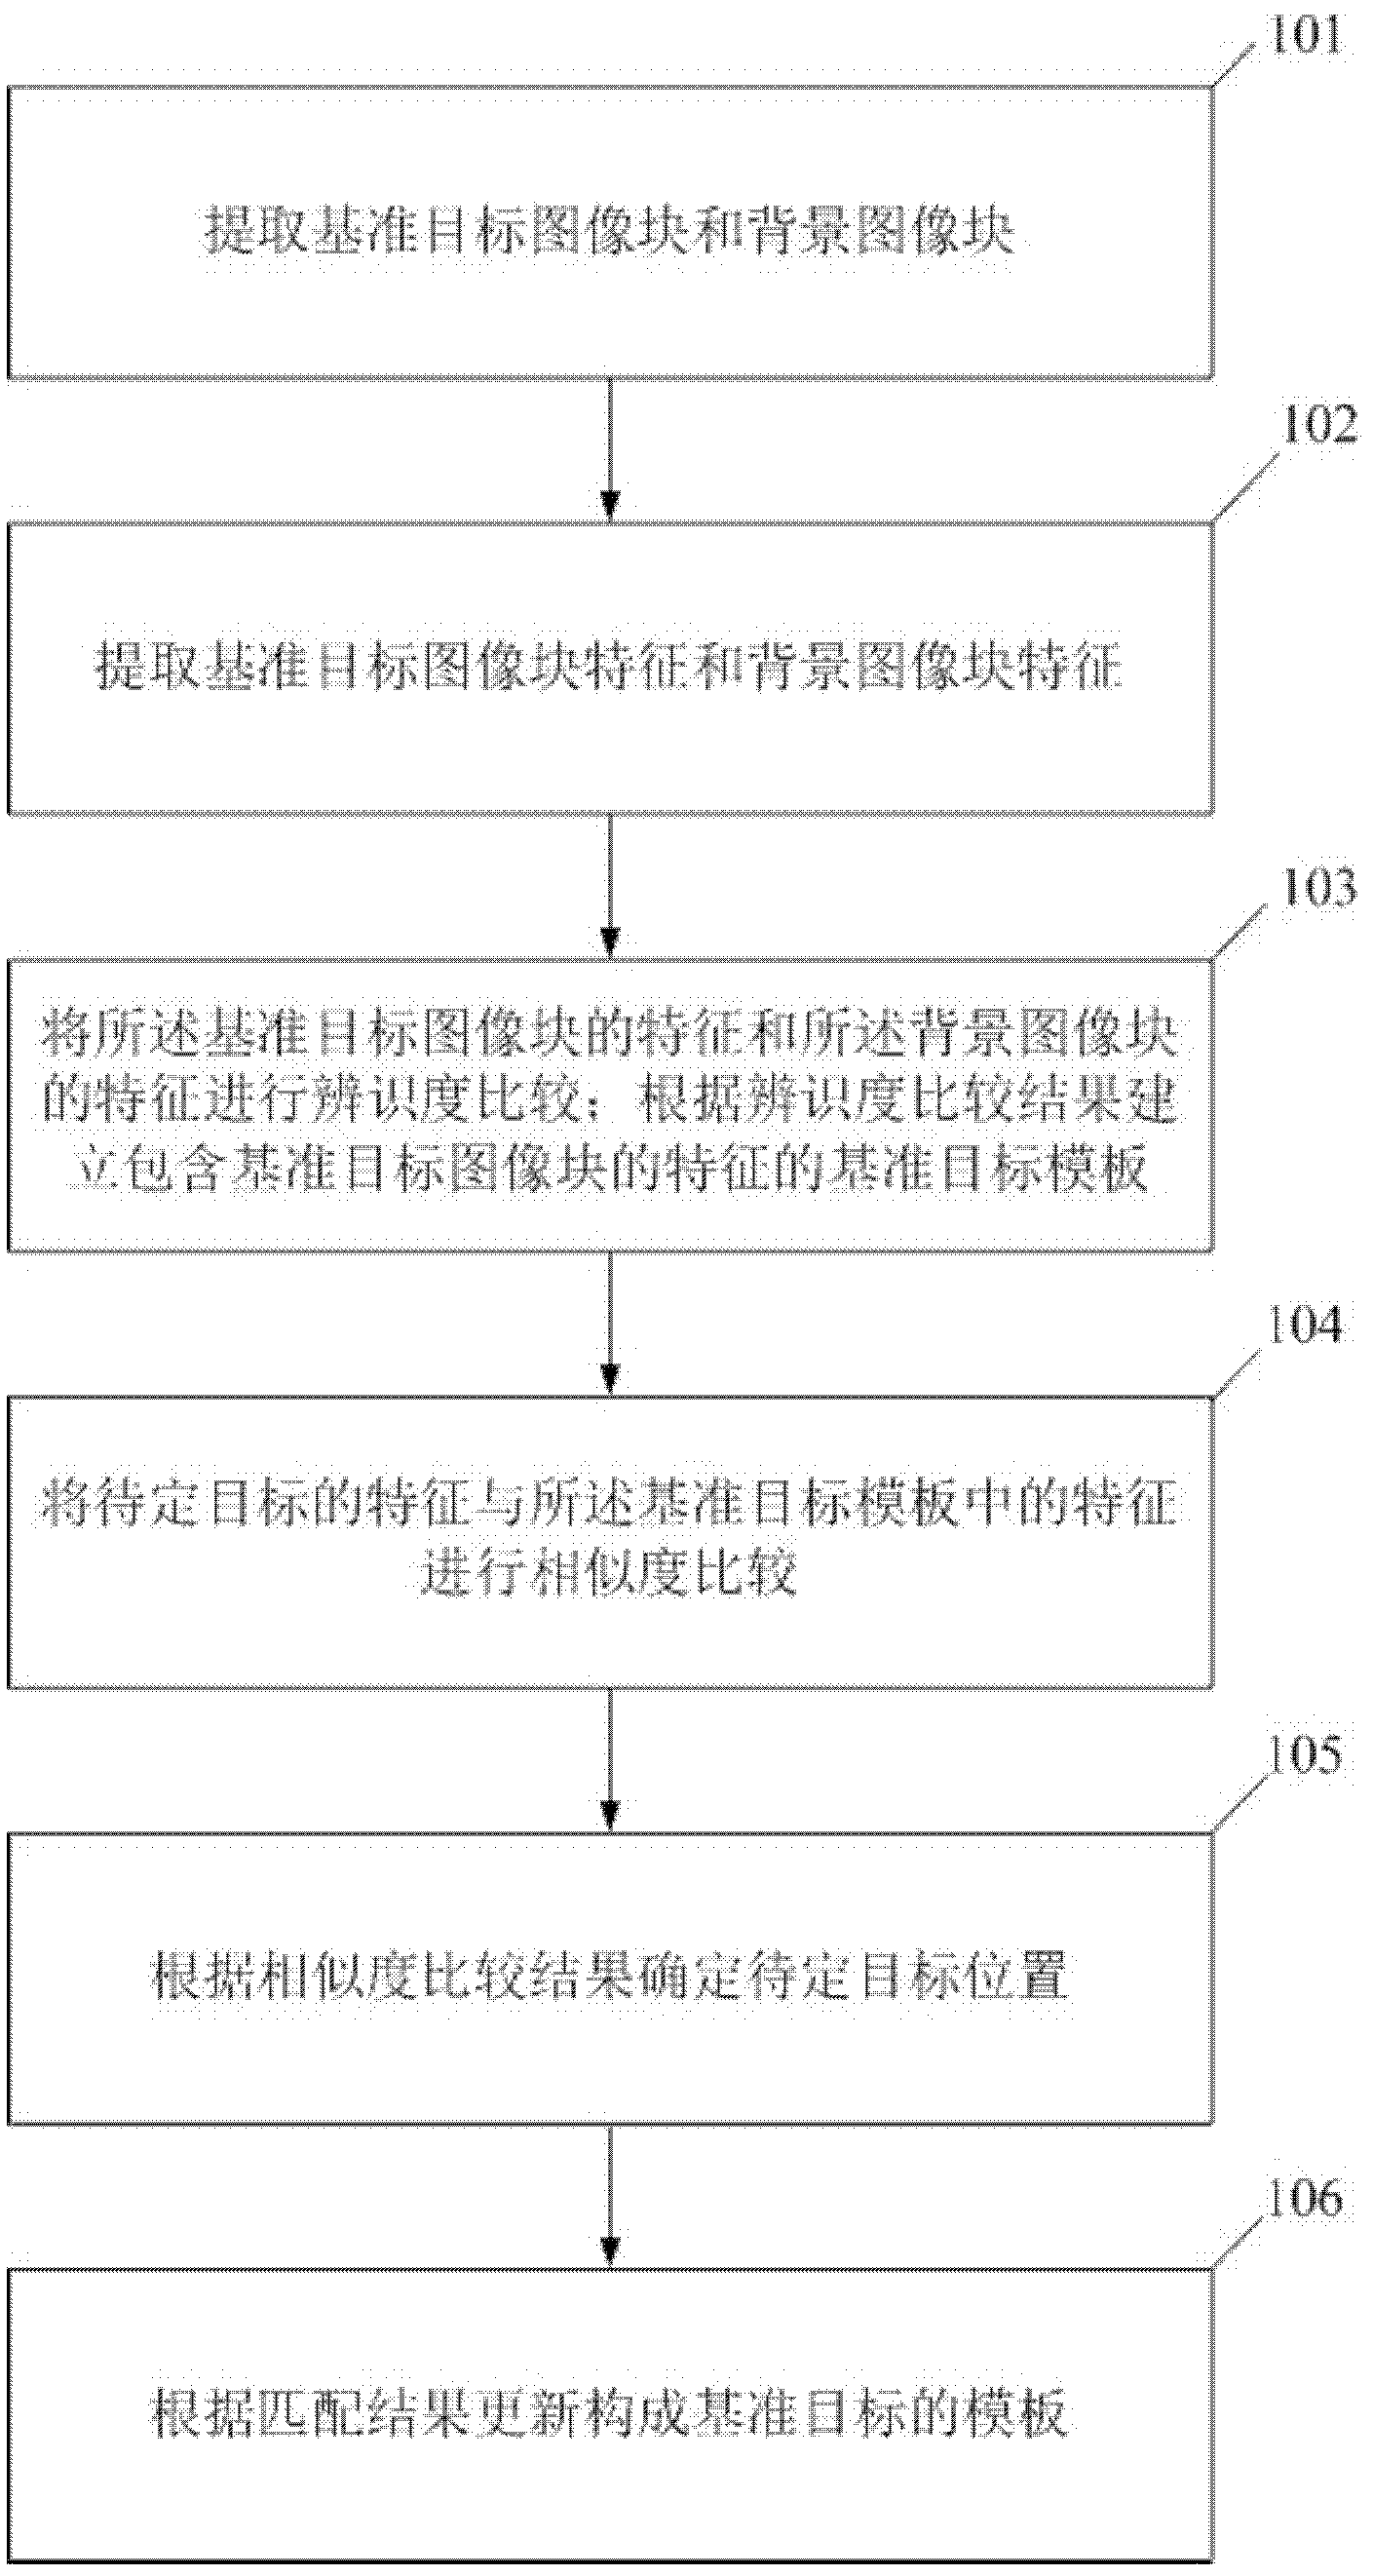 Target tracking method and system based on image block characteristics